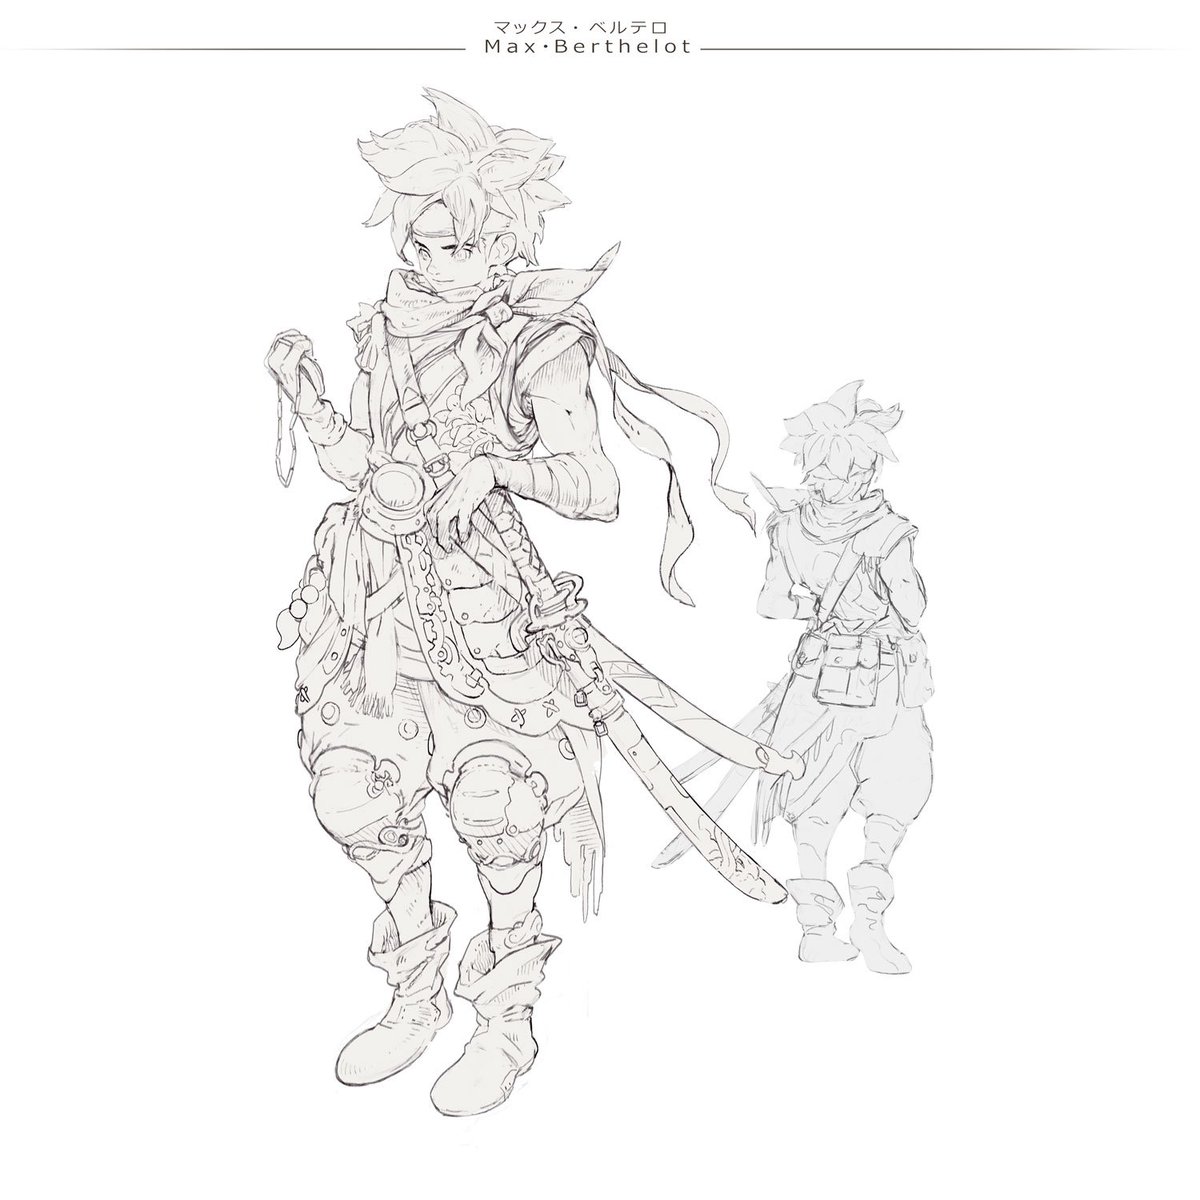 The lineart of Crono. 